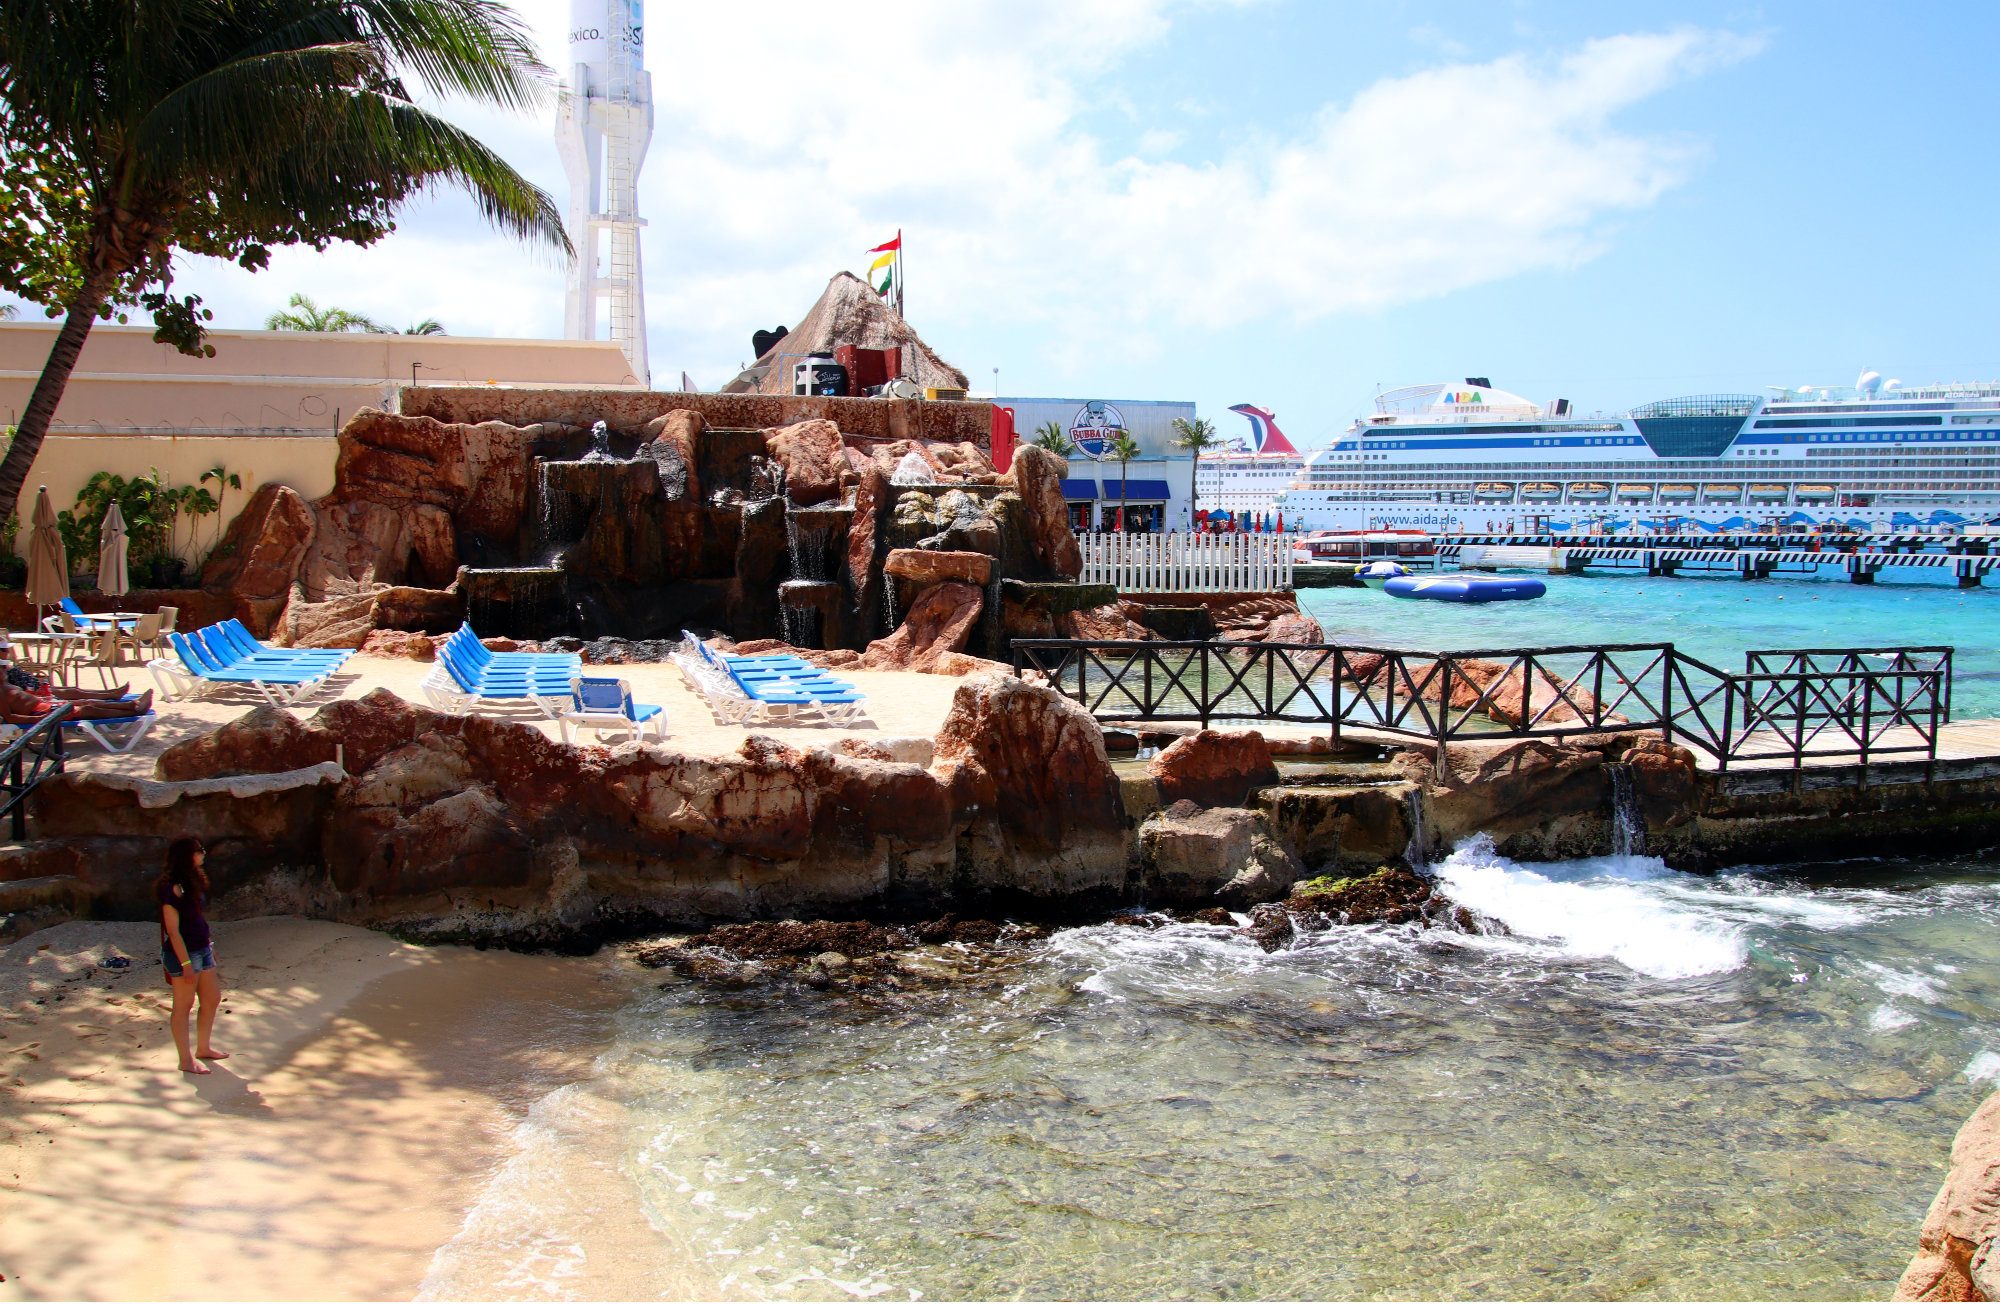 The Perfect Cozumel Resort Cruise Shore Excursion - Traveling Islanders